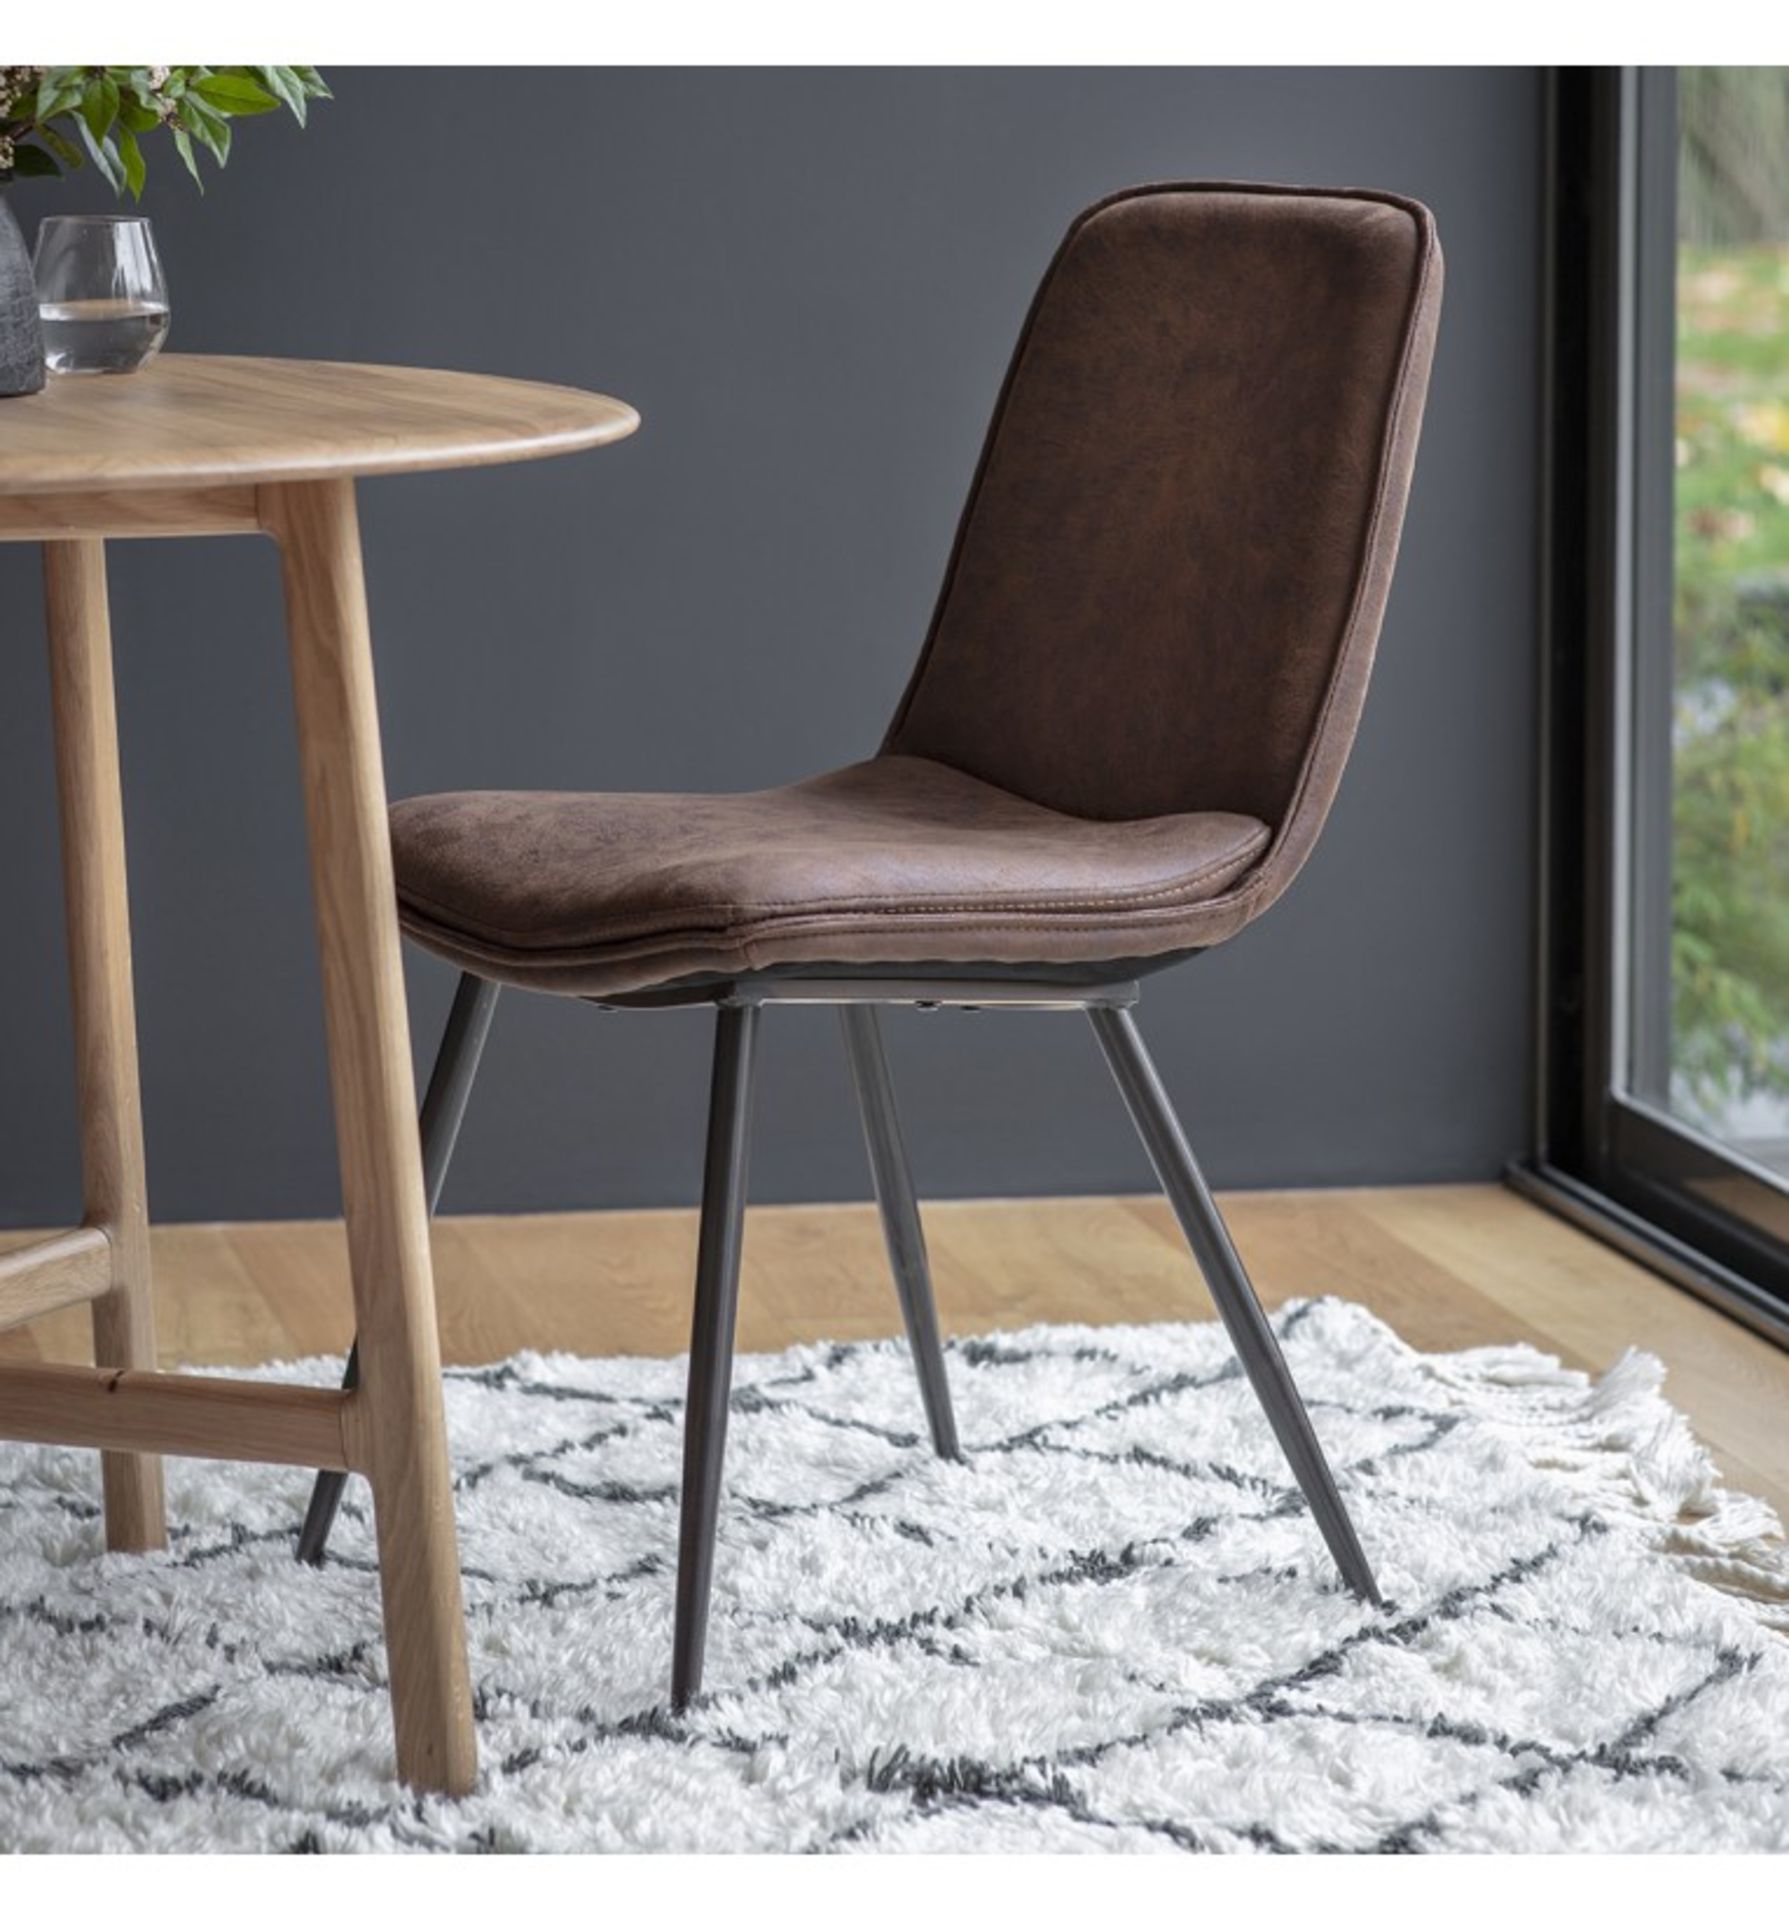 Newton Dining Chair Brown (2pk) Opulent seat design complimented by metal legs, the Newton Chair